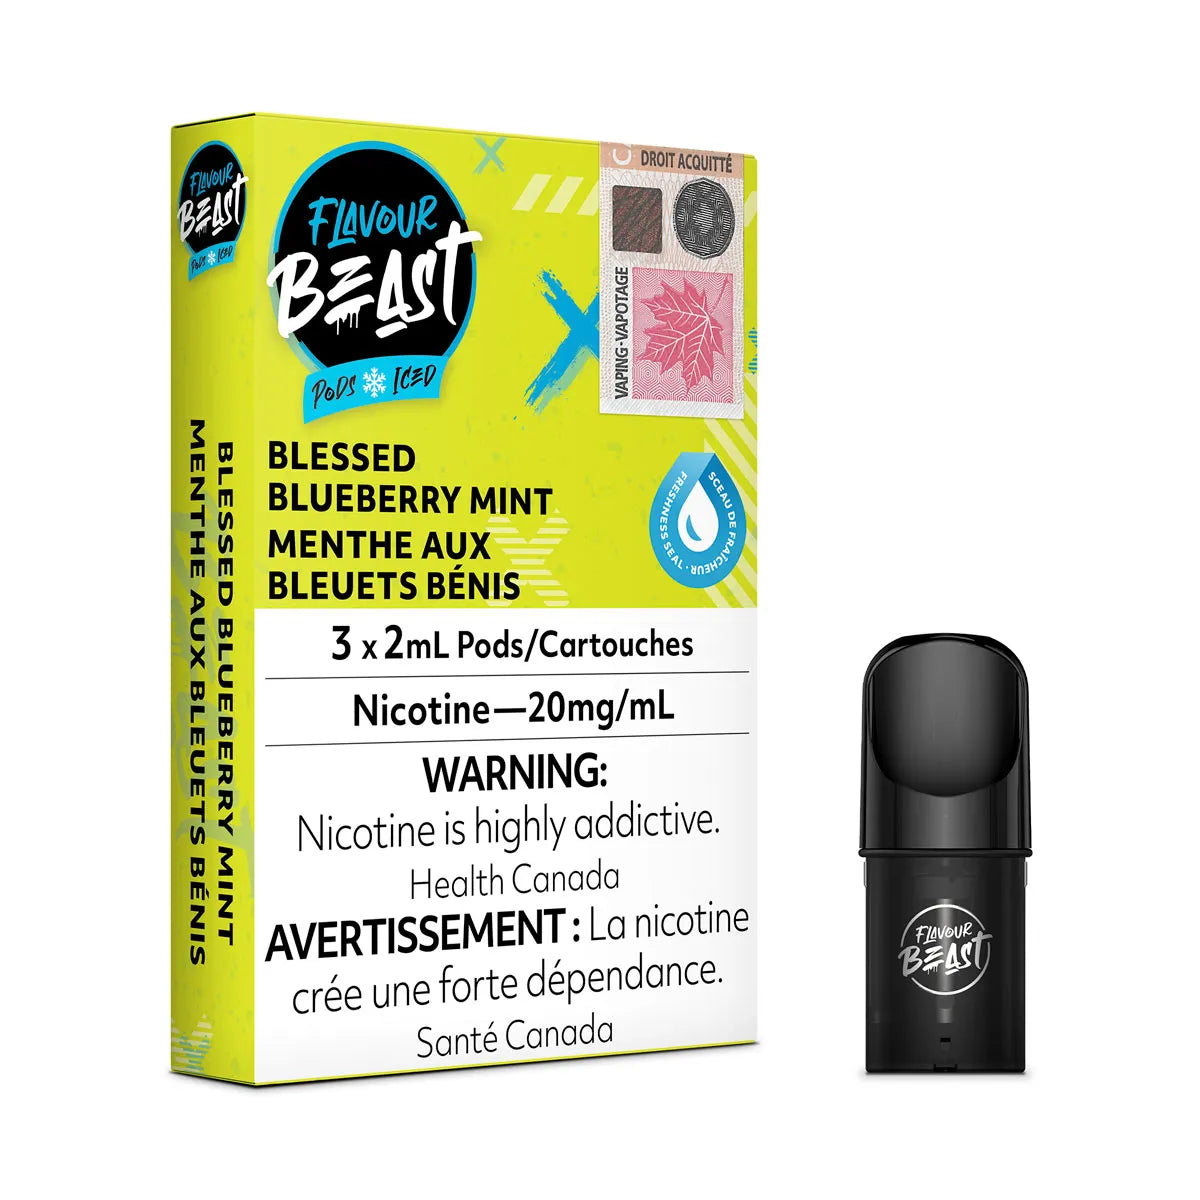 Blessed Blueberry Mint - Flavour Beast Pod Pack - 20mg - EXCISED